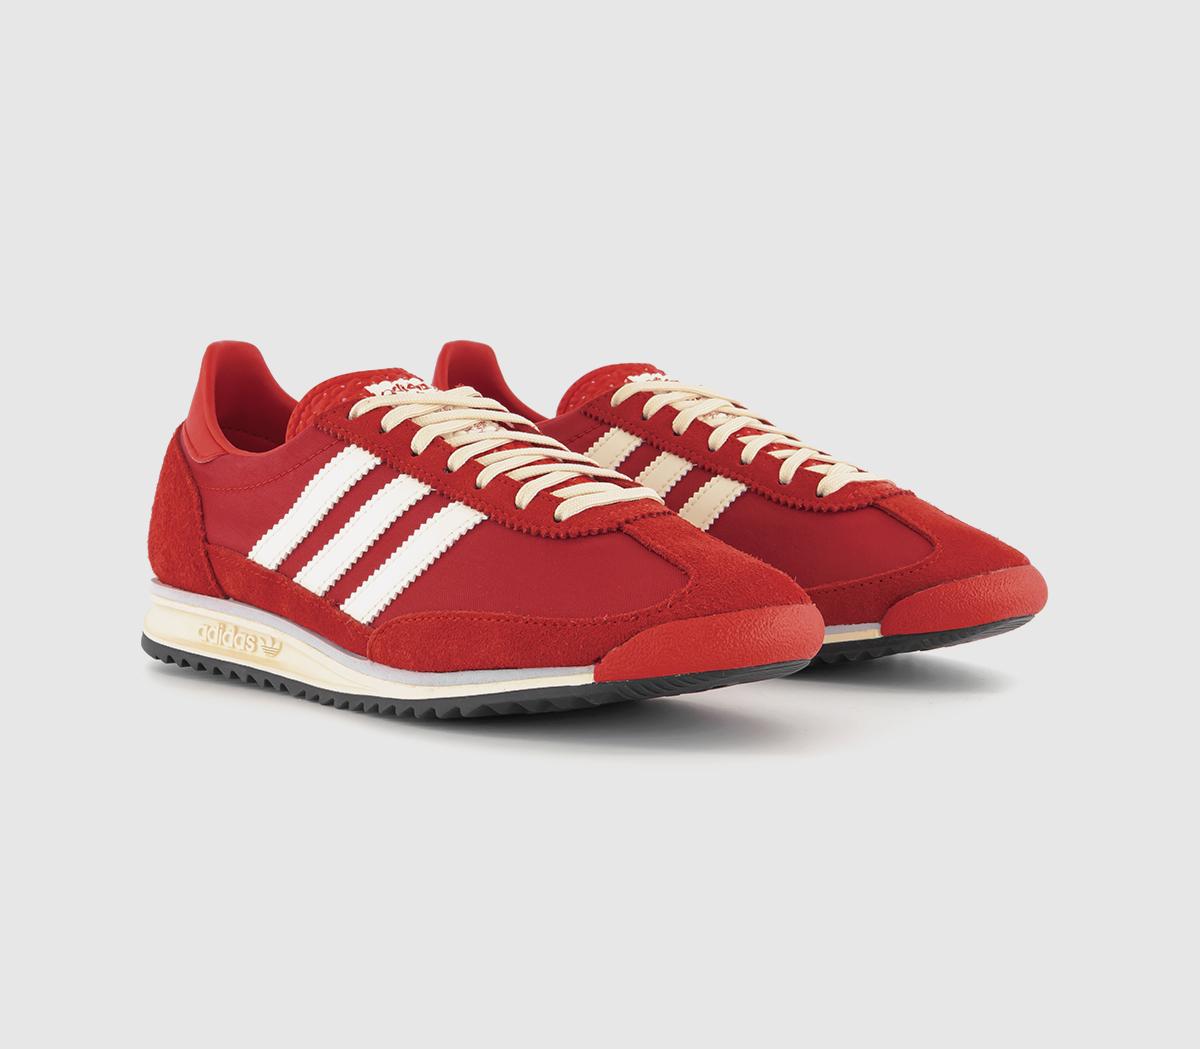 Adidas SL 72 Trainers Scarlet Red White Black, 7